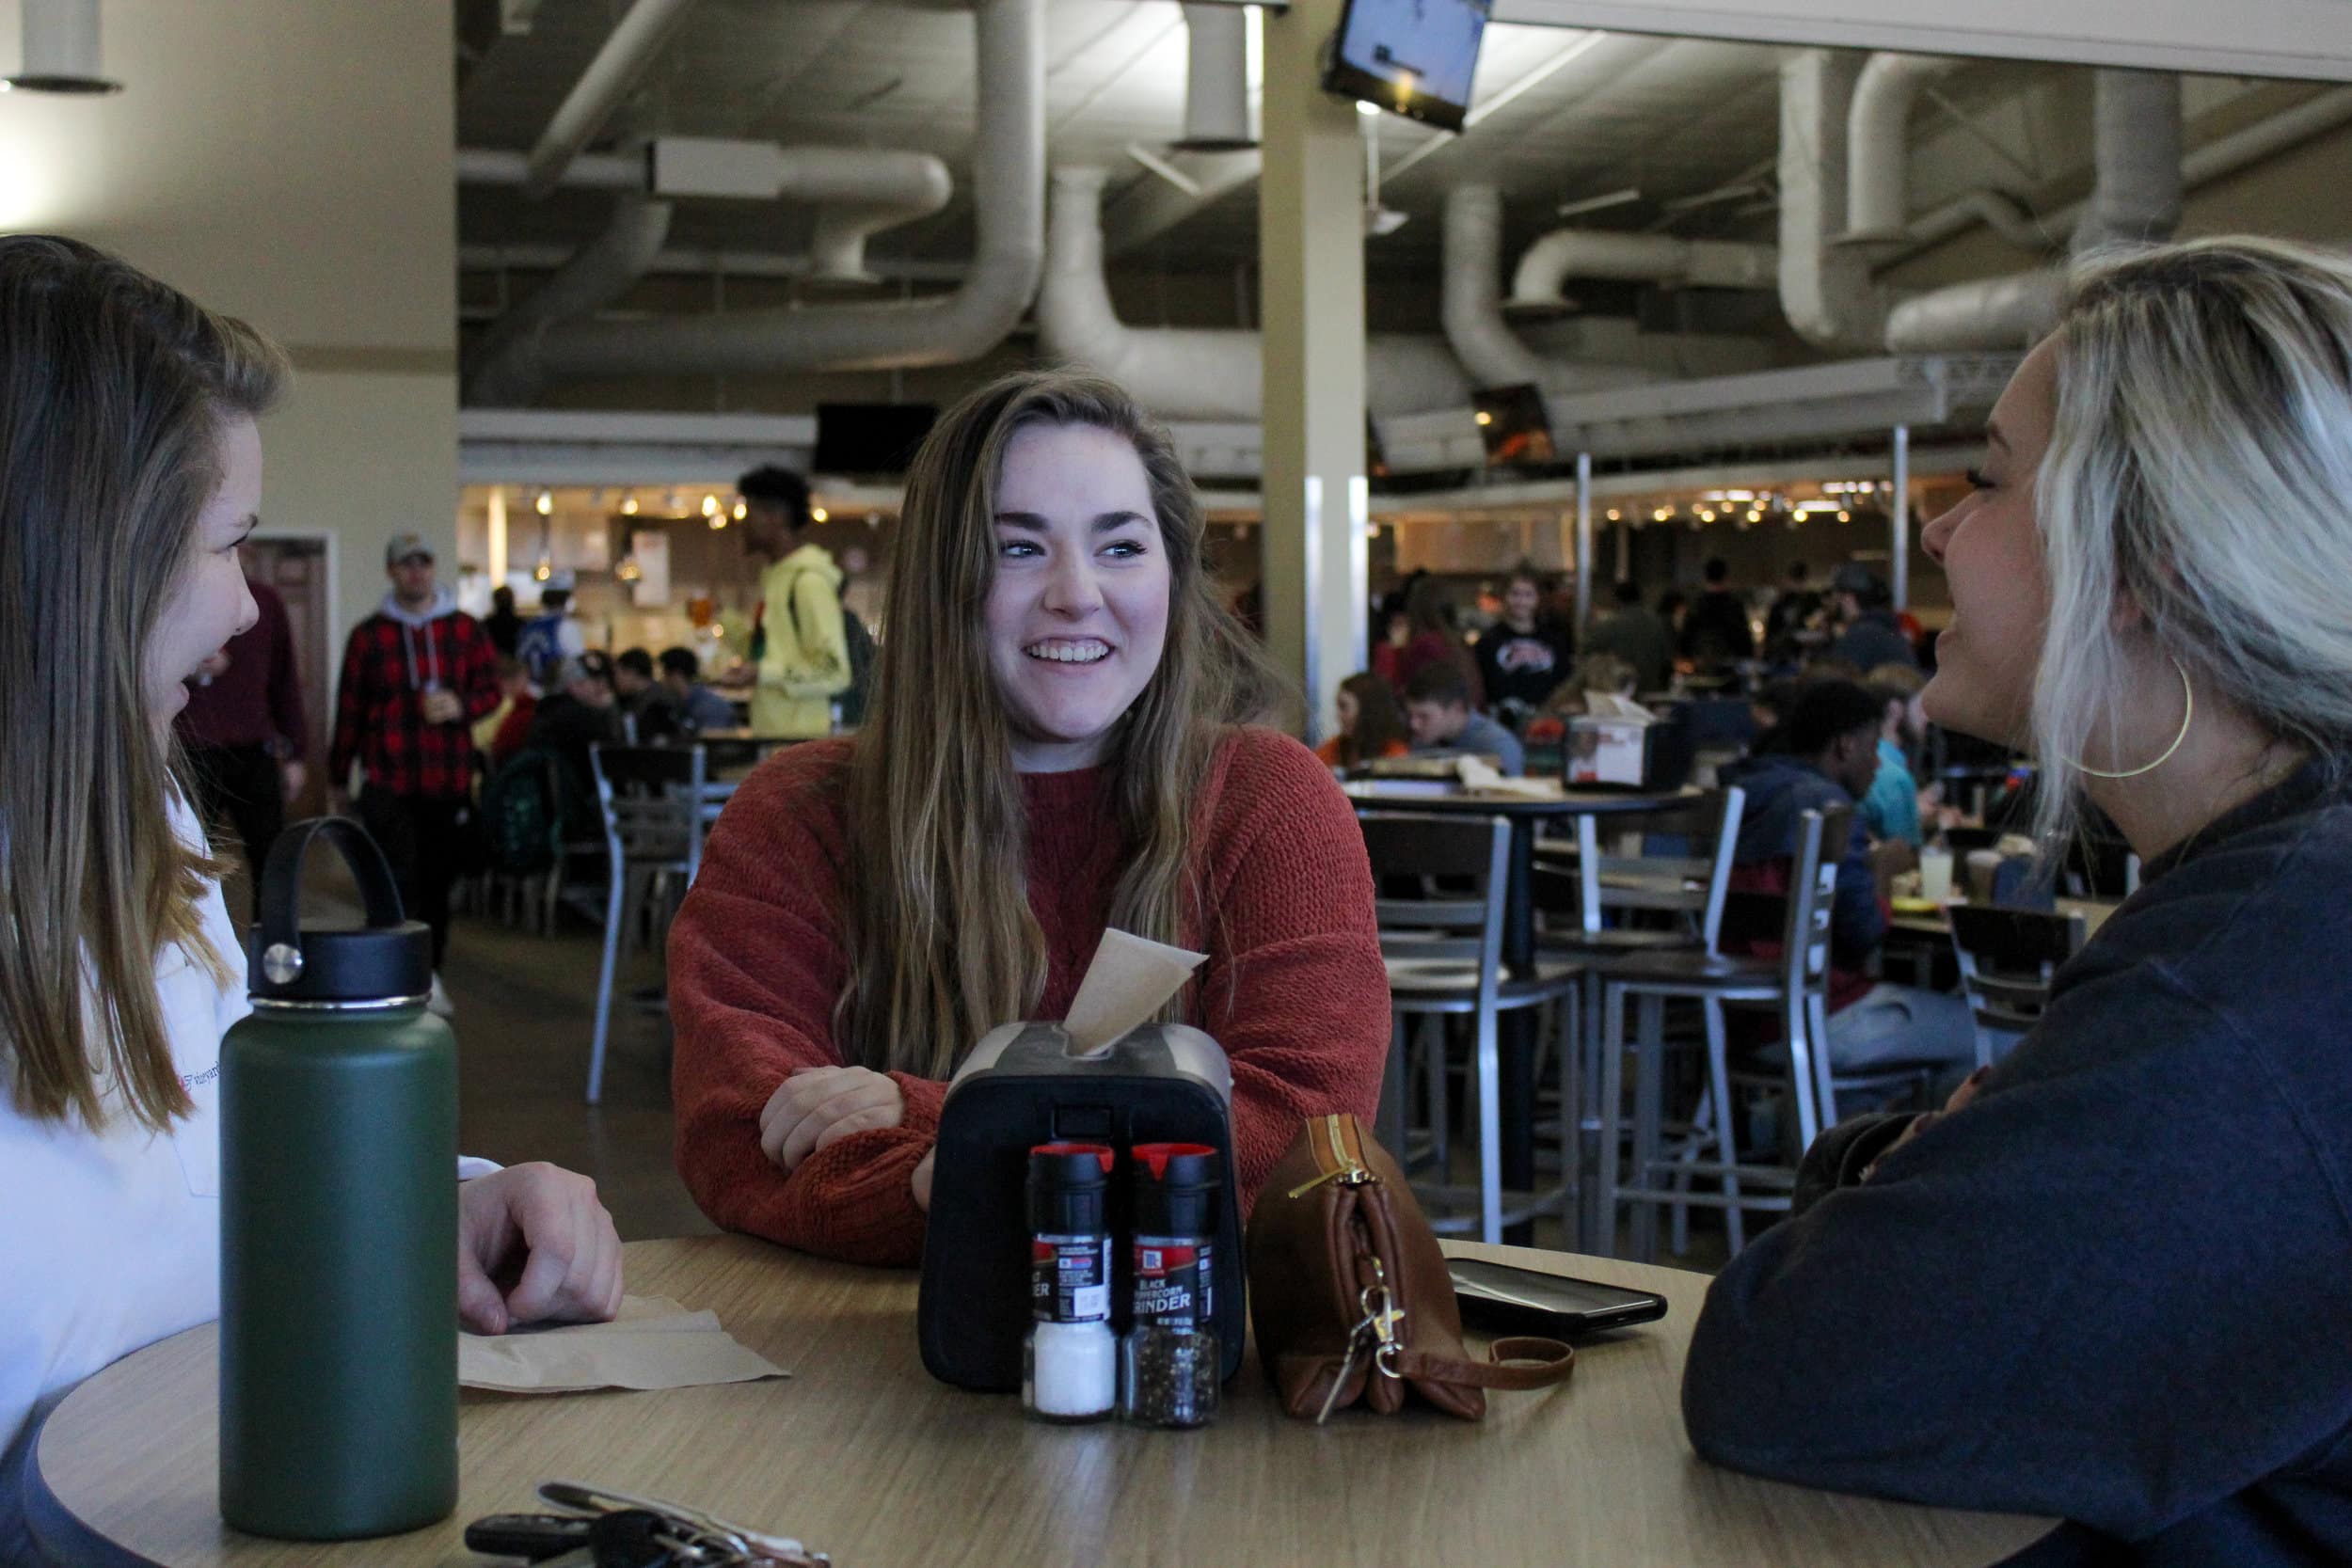 Freshmen Tess Shirley, Lauren Blackwell, and Abby Swindal socialize in the Caf before lunch.